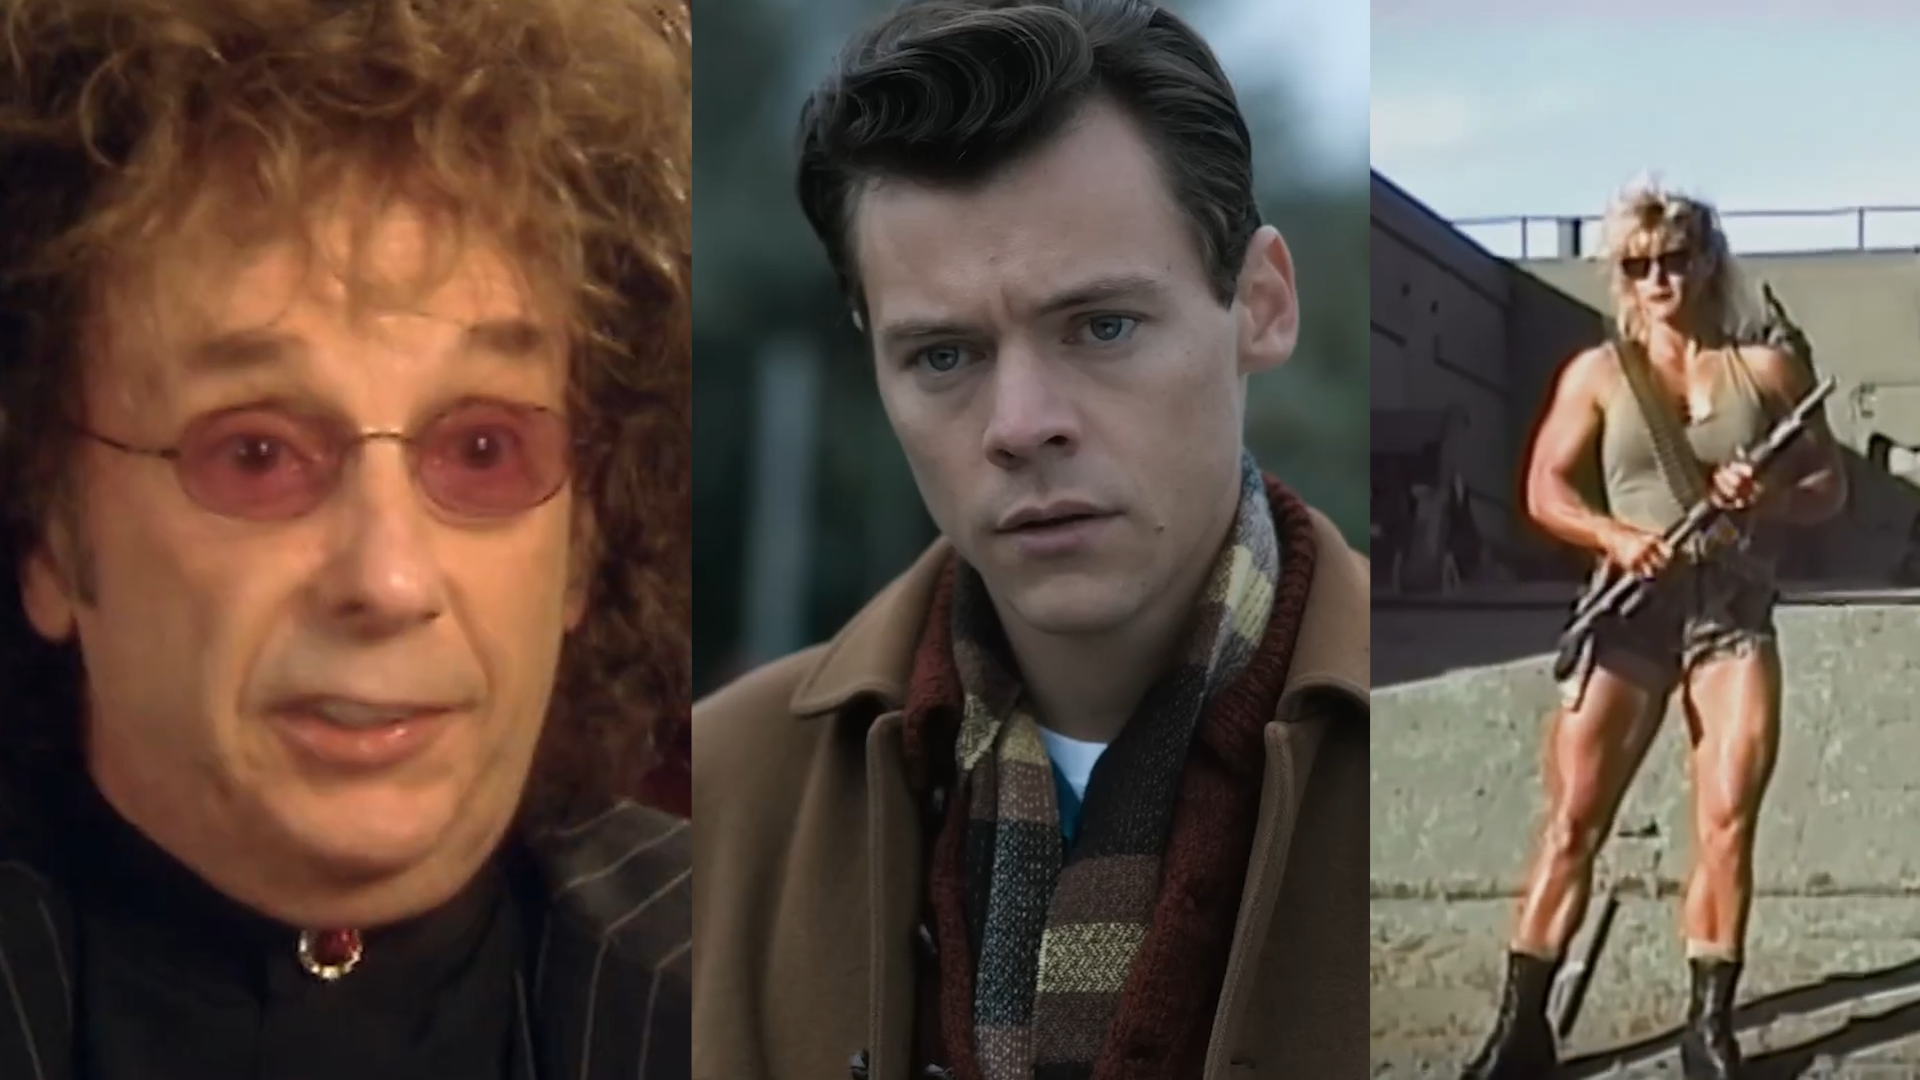 It List: New true crime series 'Killer Sally' comes to Netflix, recent co-stars Harry Styles and Florence Pugh both with new movies out, and the life of Phil Spector is on display